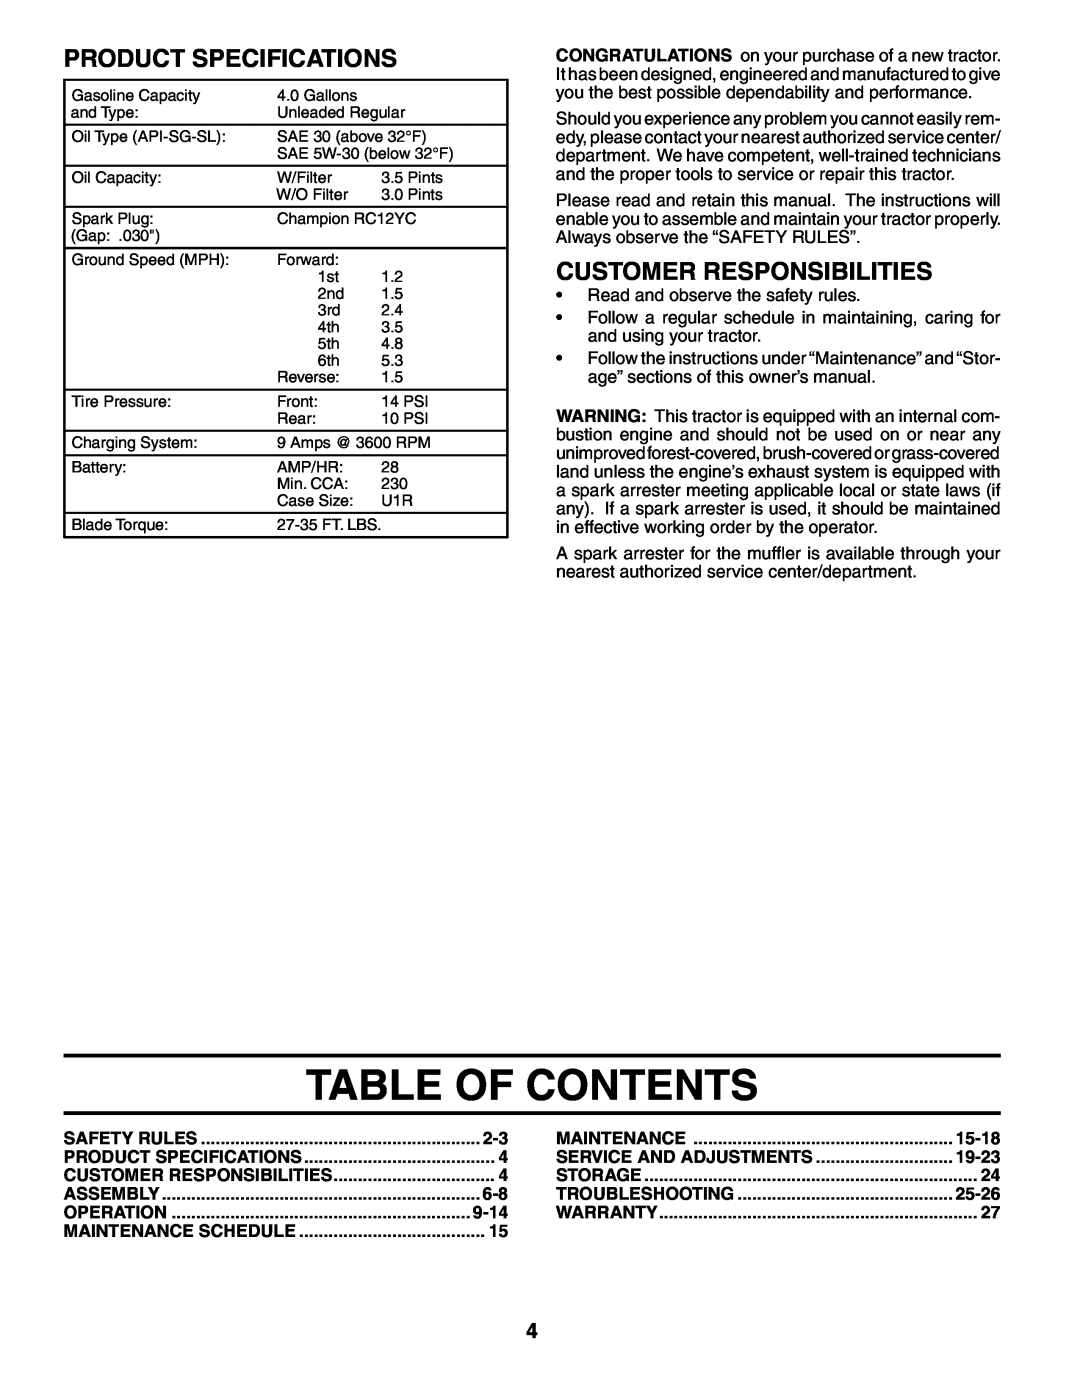 Poulan 194993 manual Table Of Contents, Product Specifications, Customer Responsibilities, 9-14, 15-18, 19-23, 25-26 